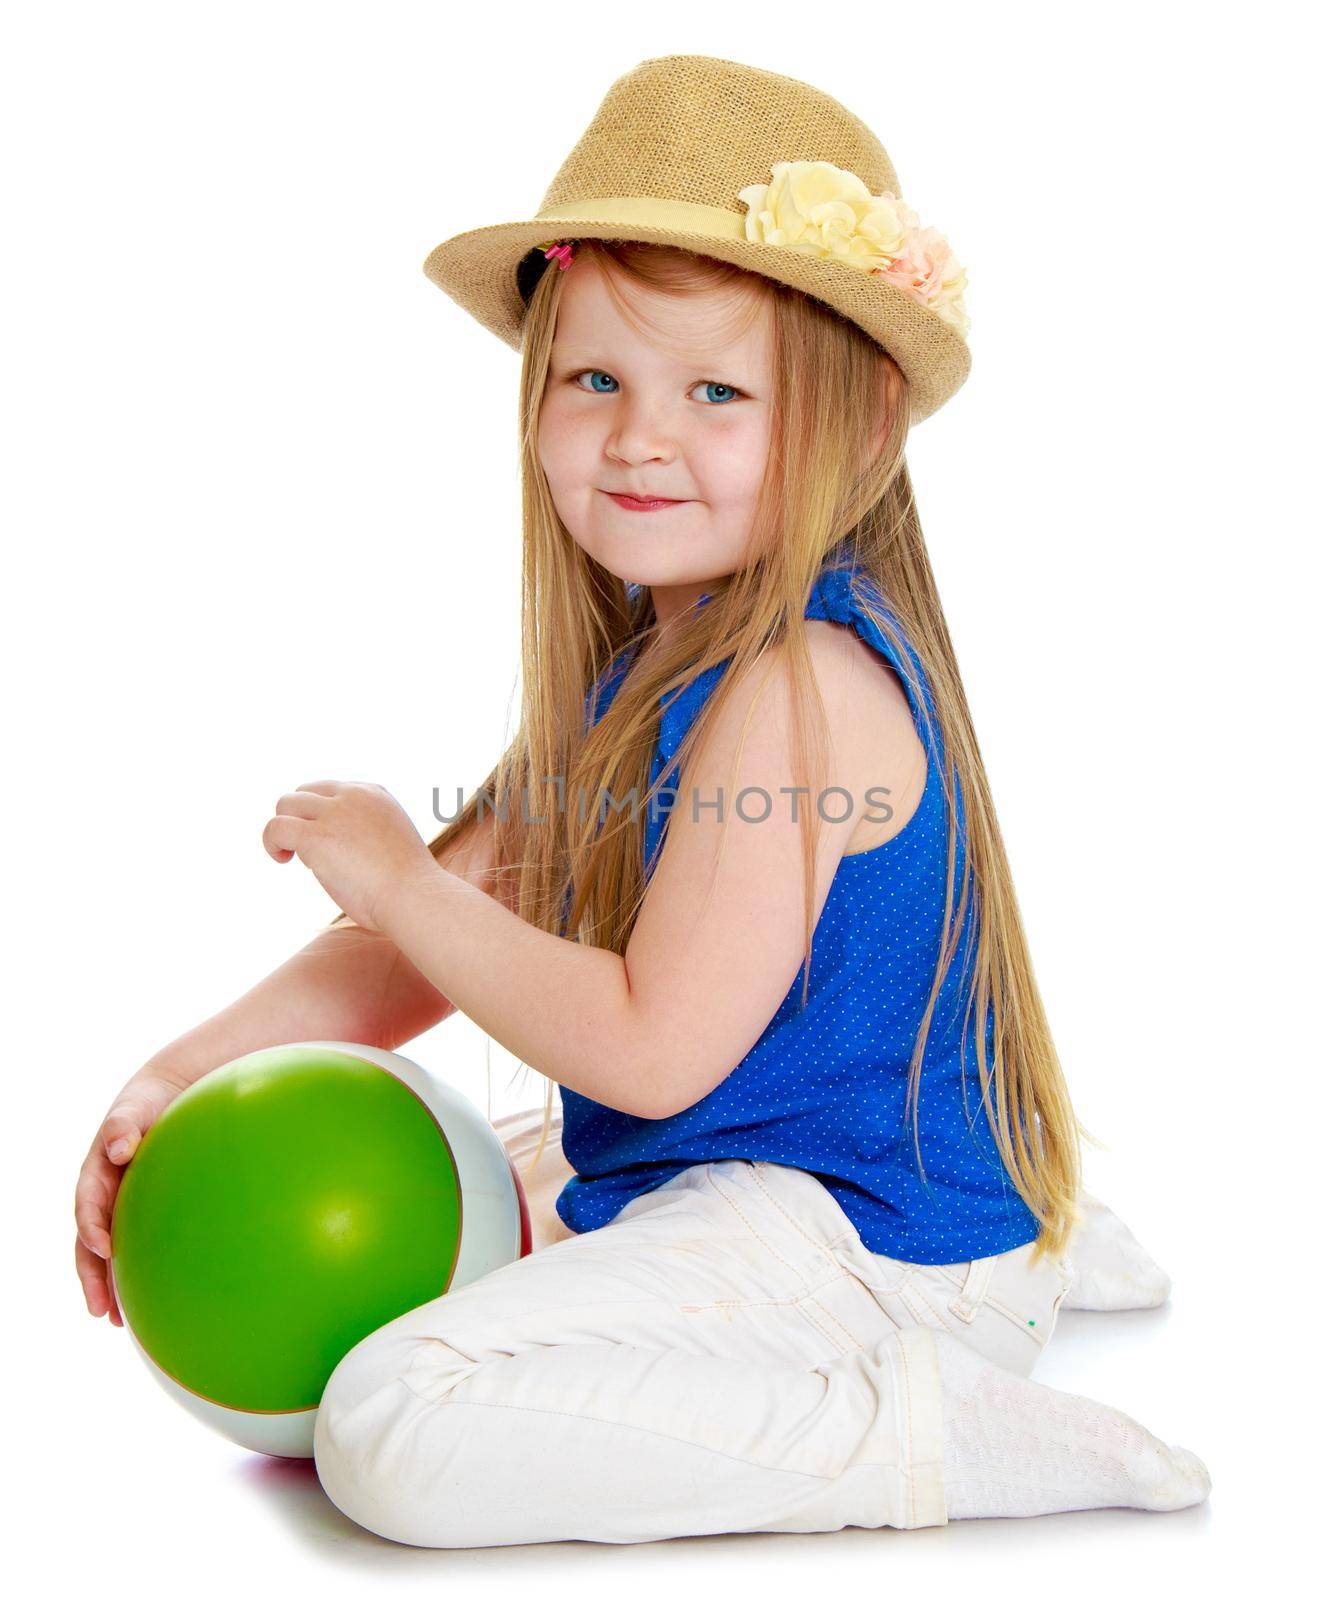 Cute little girl in hat plays with a sword - Isolated on white background